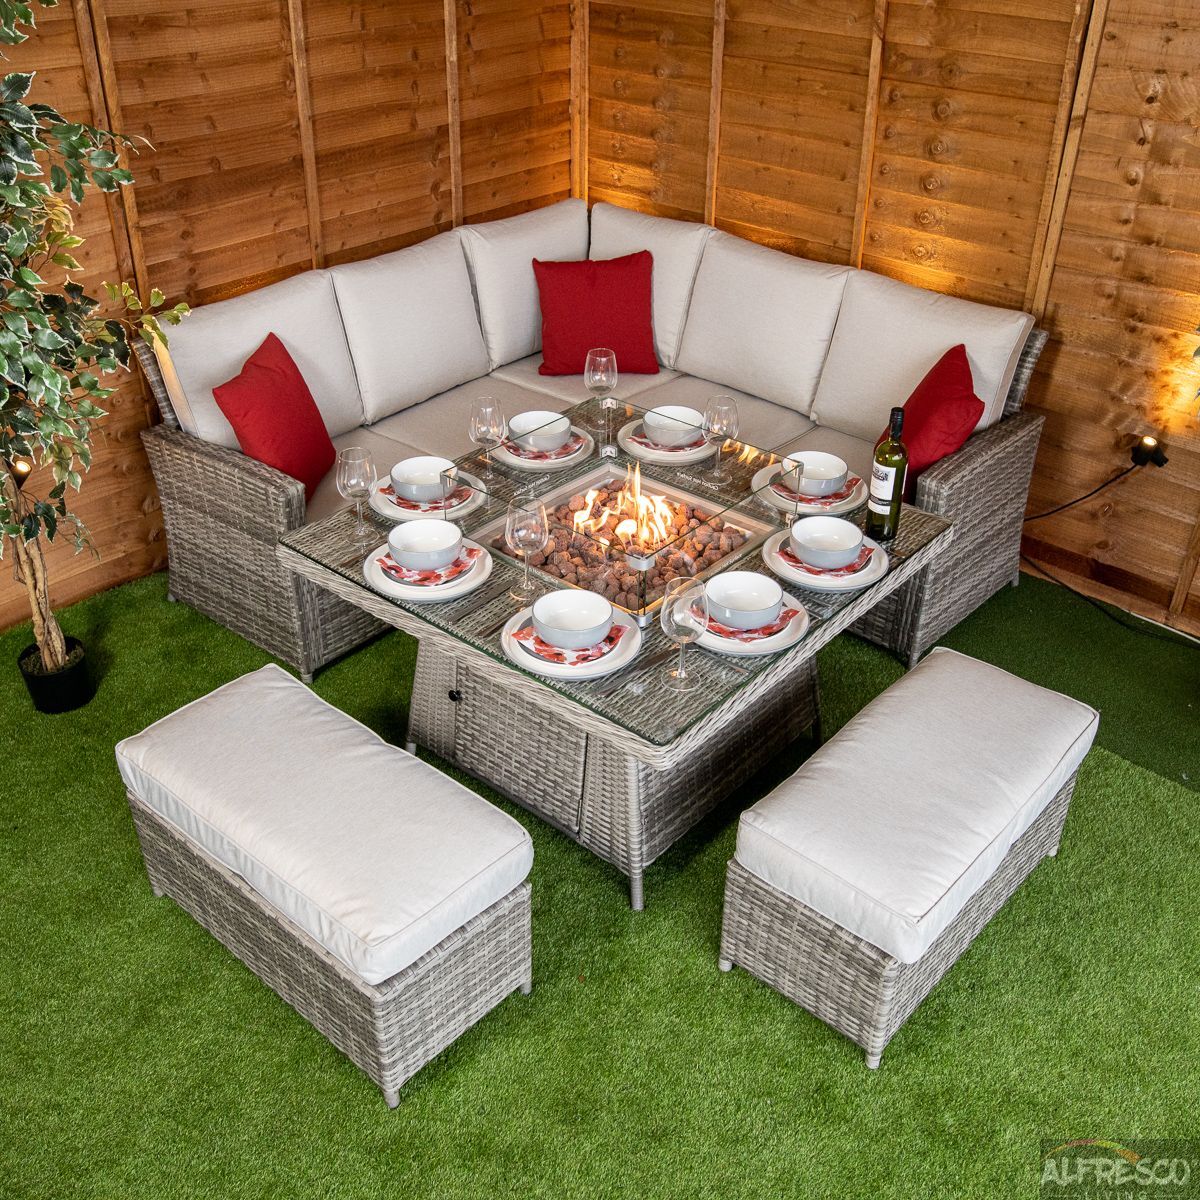 From Sunset Soiree to Family BBQs: Embrace Versatility with Rattan Fire Pit Dining sets